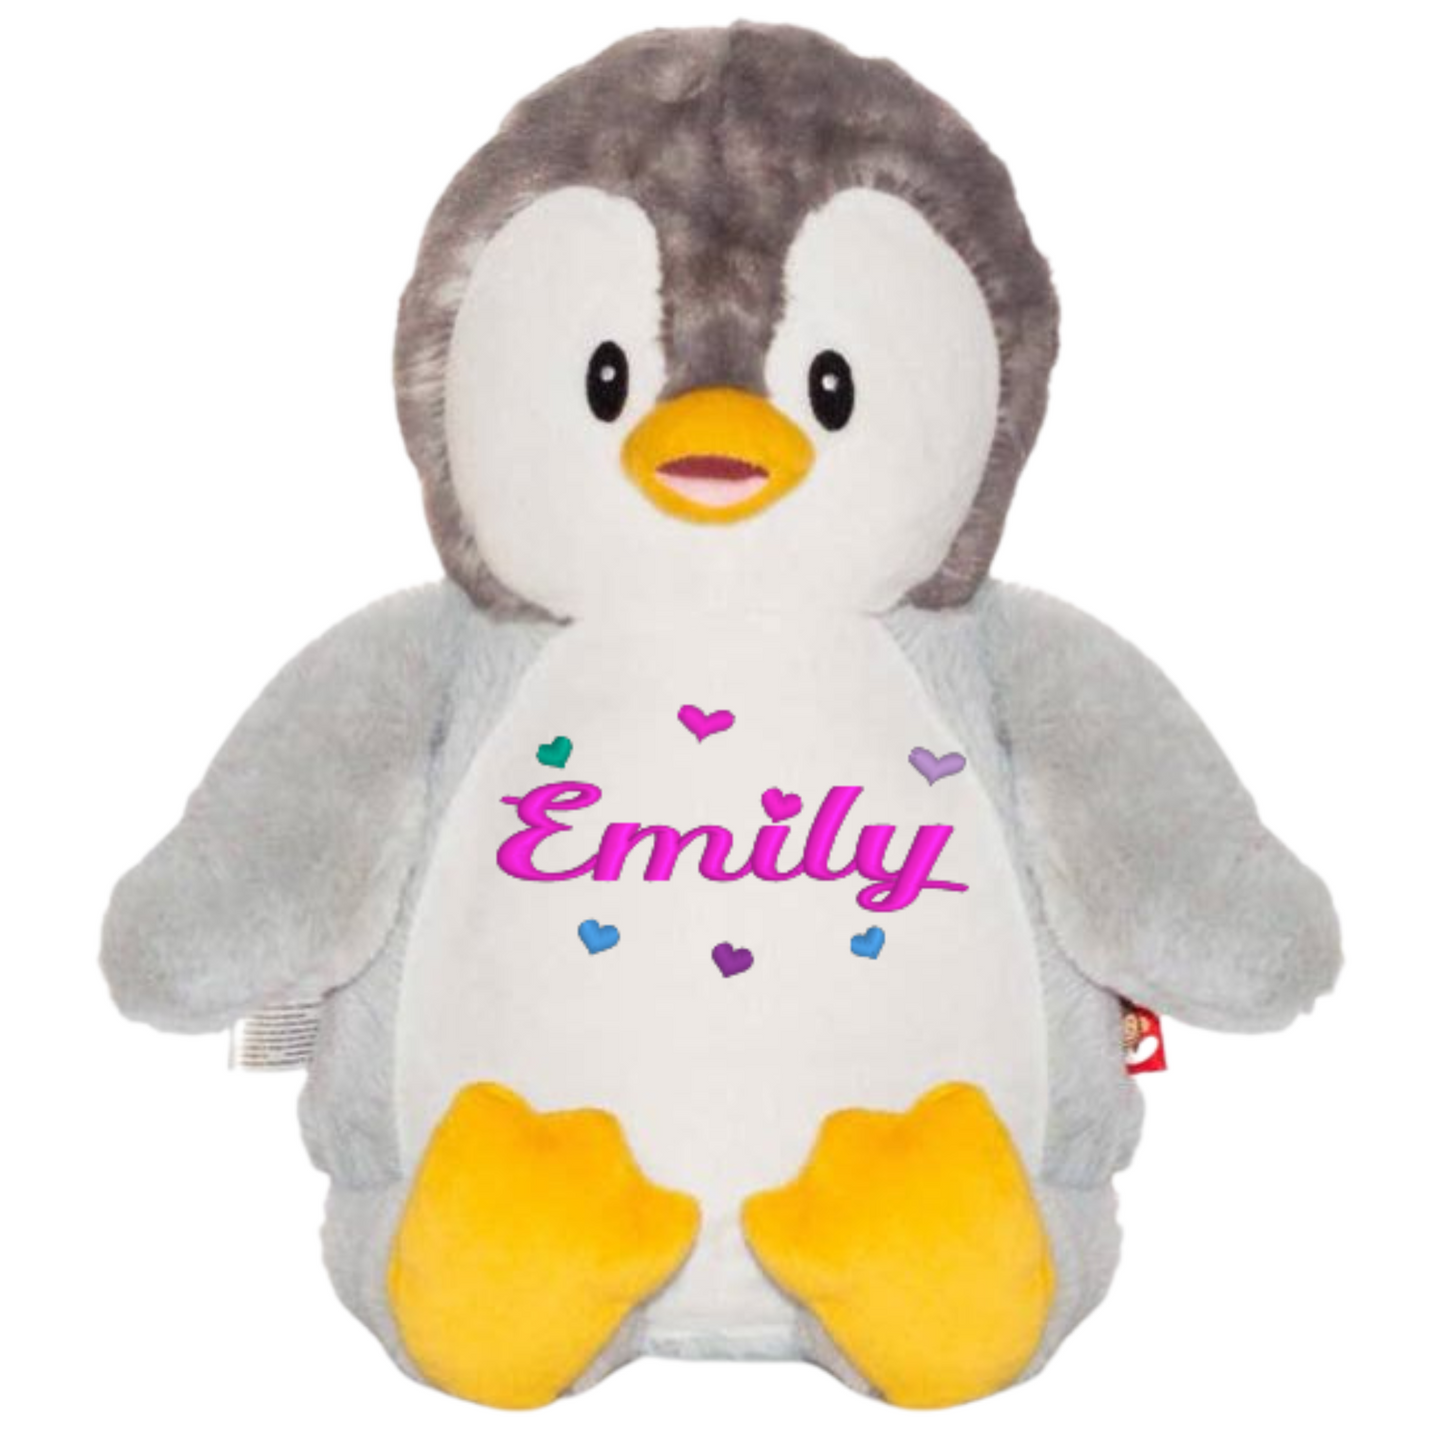 Penguin Stuffed Animal Personalized with name for a girl